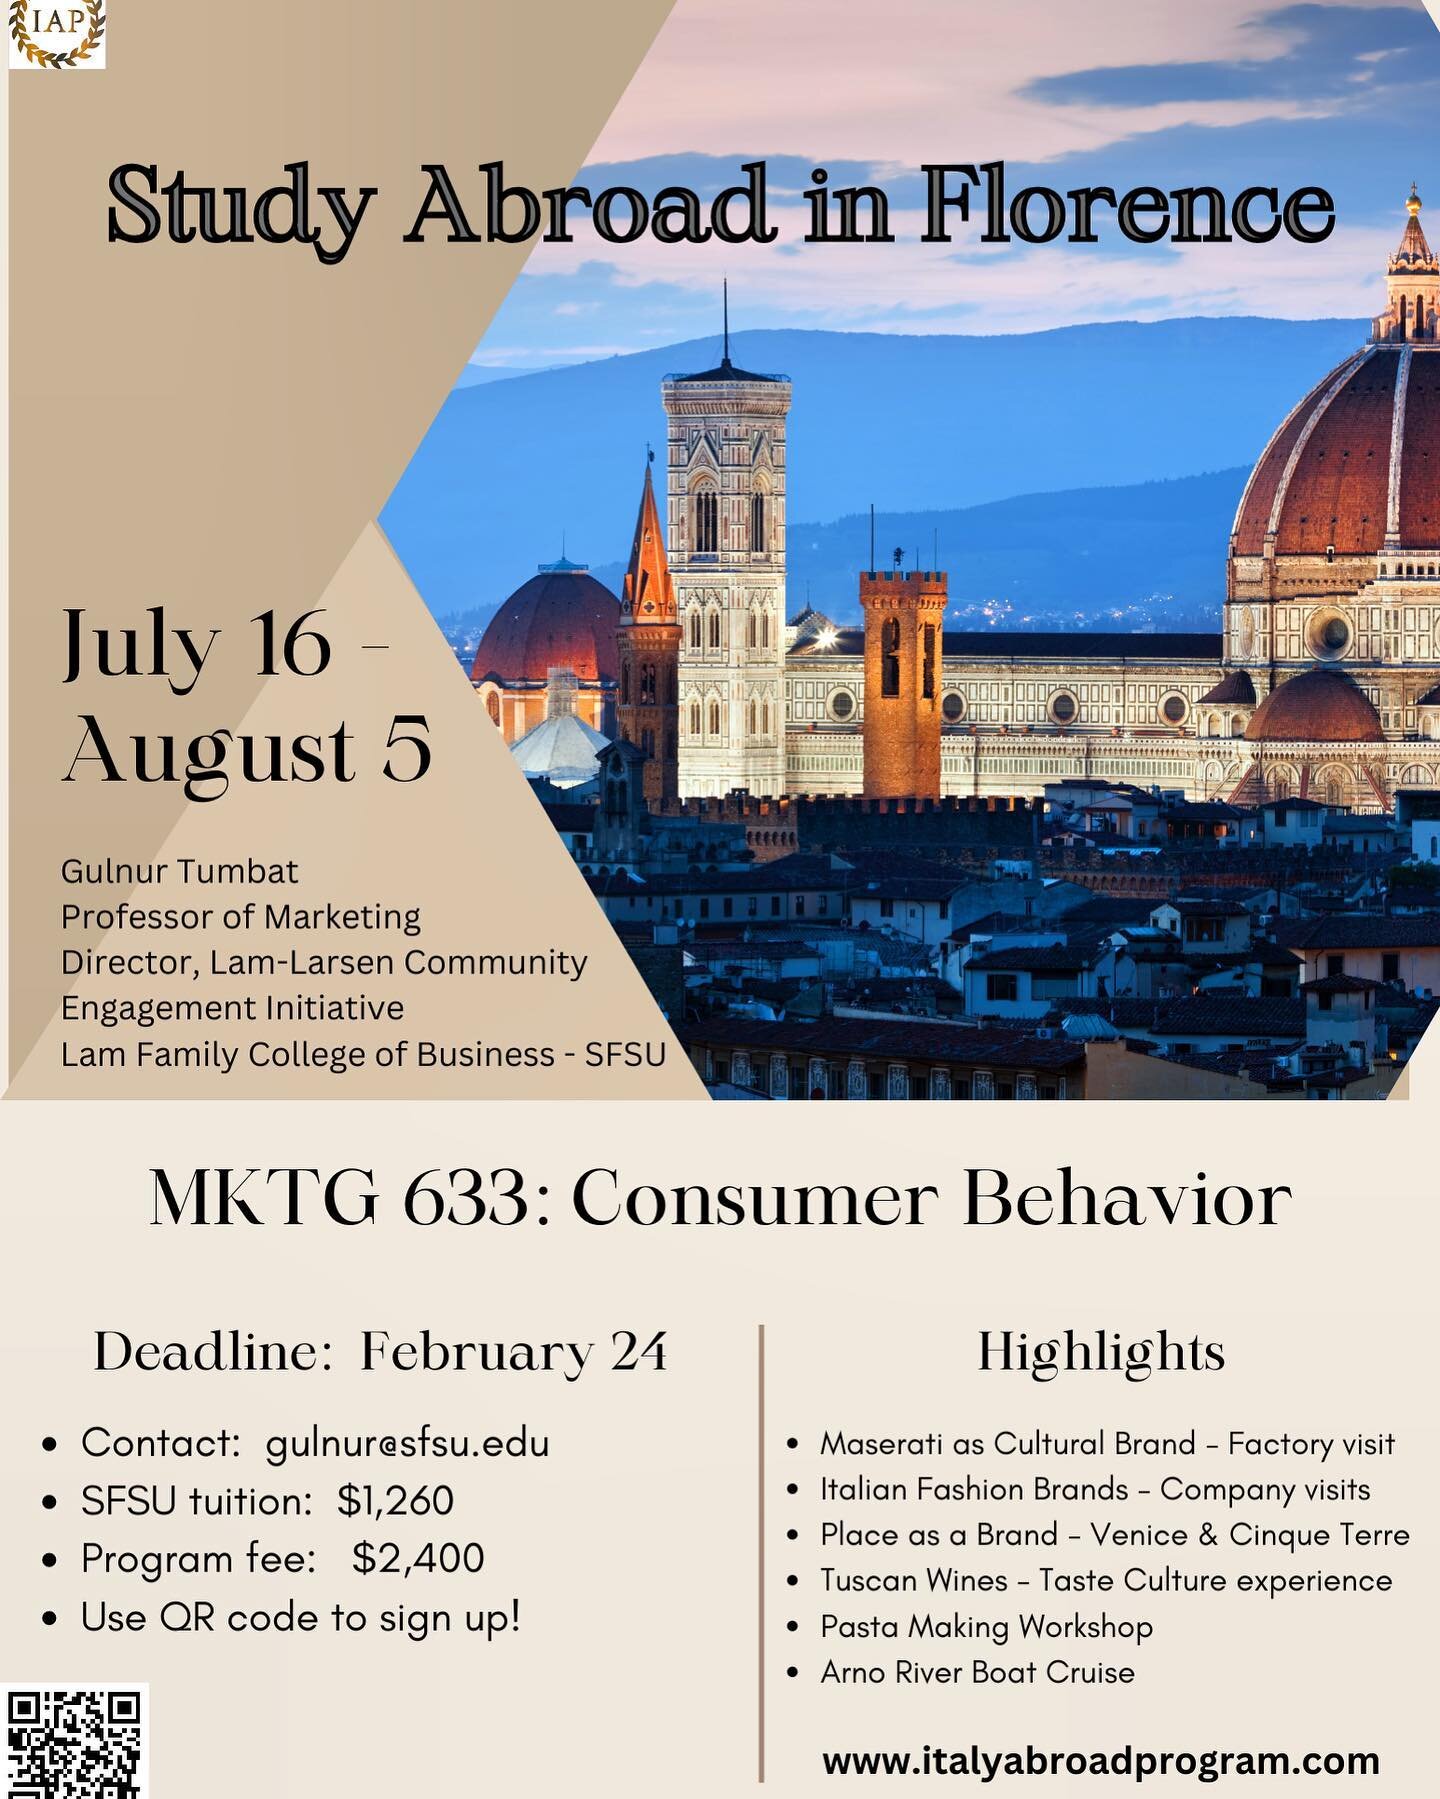 MKTG 633: Consumer Behavior in Florence, Italy 🇮🇹🇮🇹🇮🇹

OPEN TO ALL STUDENTS 🙌🏽

🇮🇹Deadline: February 24
🇮🇹Price: $3,660 (Includes program fee &amp; tuition)
🇮🇹Location: Florence 
🇮🇹Dates: July 16 - August 5

This is life changing, don